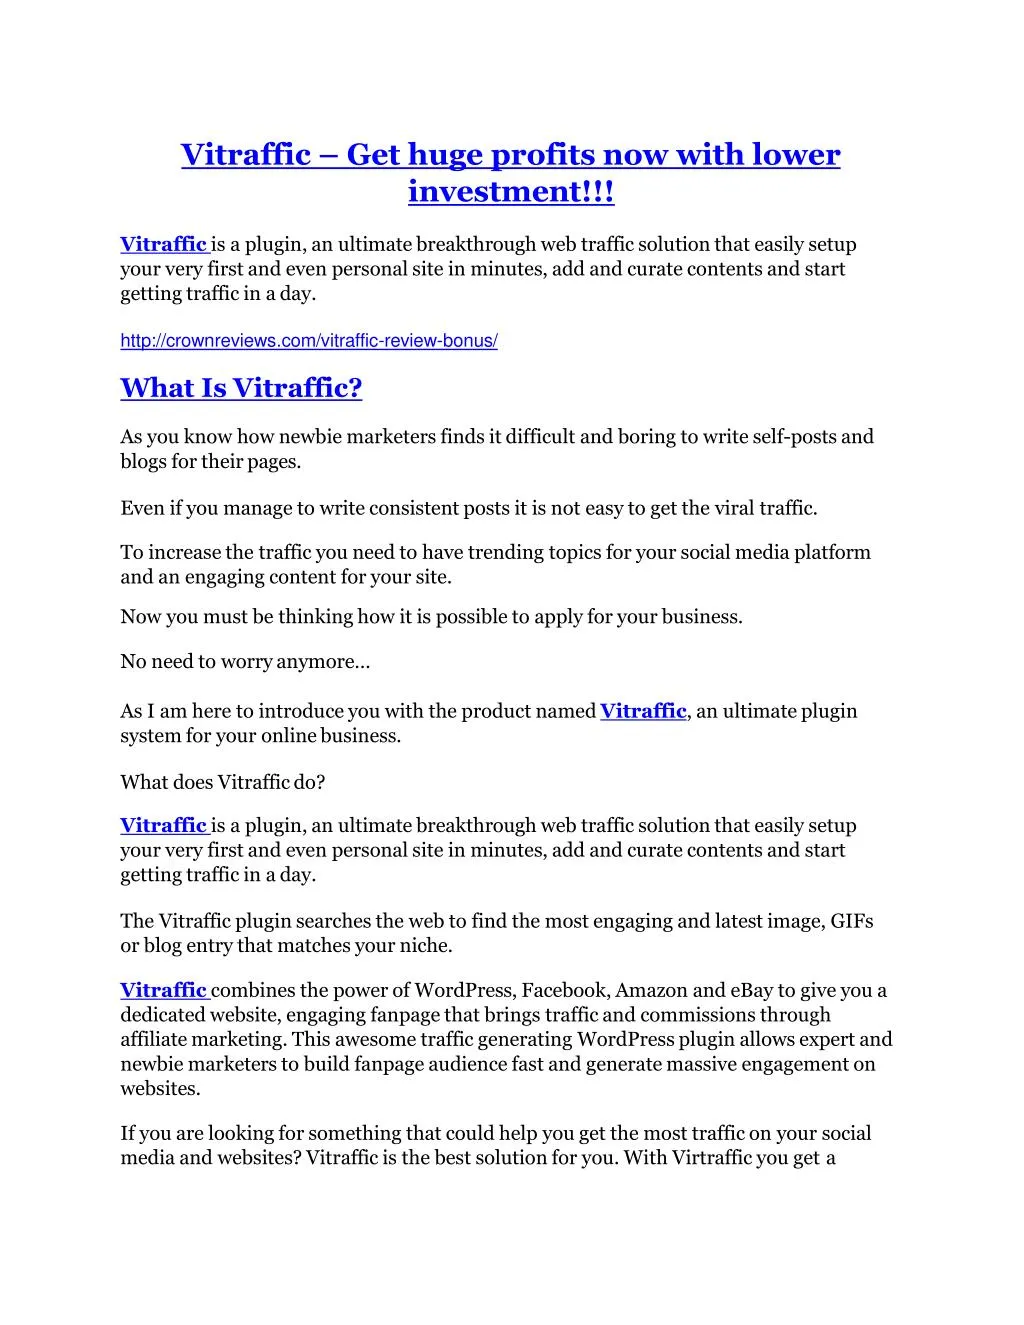 vitraffic get huge profits now with lower